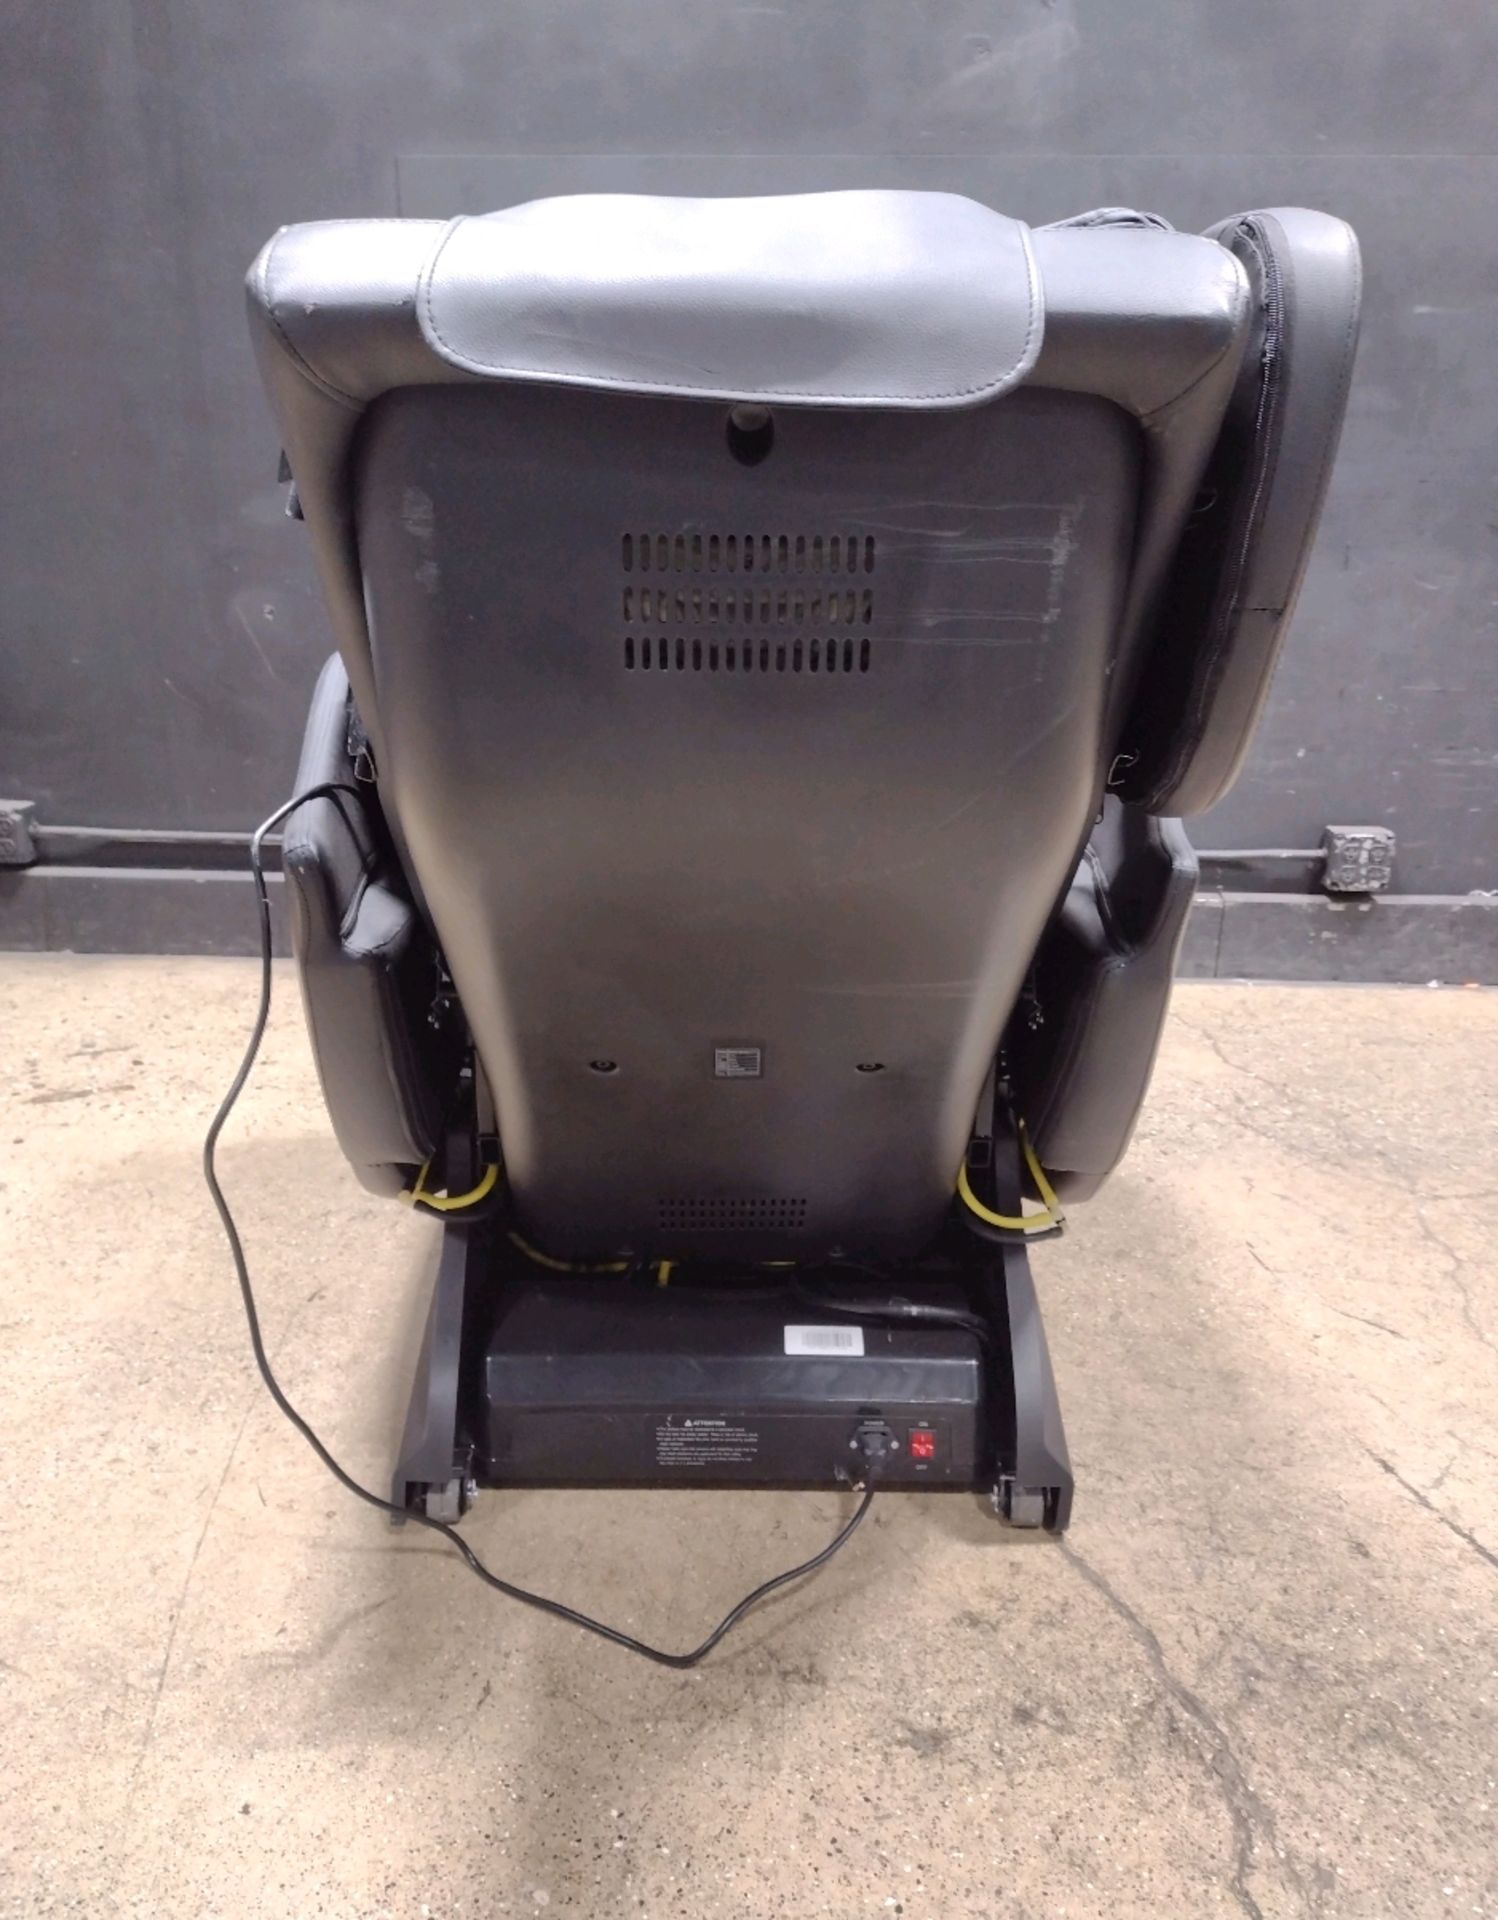 REAL RELAX DELUXE MASSAGE CHAIR (LOCATED AT 3325 MOUNT PROSPECT ROAD, FRANKLIN PARK, IL, 60131) - Bild 4 aus 4